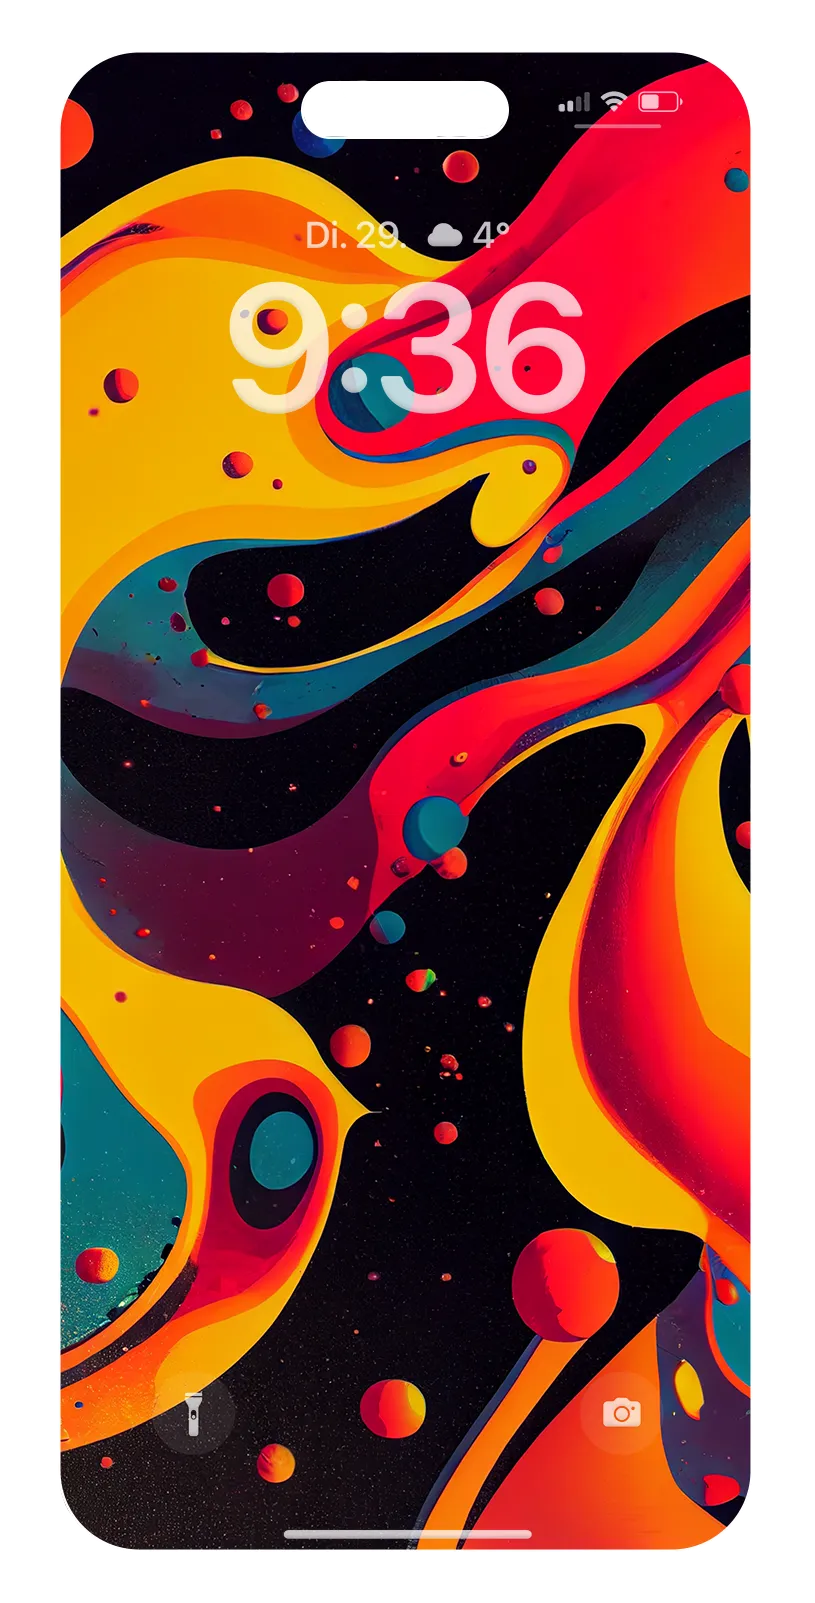 The best free high resolution 4k luxury background collections for Iphone 14 pro Max, Iphone 14 pro, iPhone 14 Plus, iPhone SE,
iPhone 13 Pro Max, iPhone 13 Pro, iPhone 13 and free wallpapers for Android, Samsung Galaxy S22 Ultra, Samsung Galaxy S22+.
Google Pixel 7 Pro.
Oppo Find X5 Pro.
Google Pixel 7.
Honor Magic4 Pro 5G.
Xiaomi 12T Pro.
Xiaomi 12T 5G.
3d-illustration, abstract, art, artistic, background, beautiful, beauty, blue, bright, brochure, brush, canvas, closeup, color, colorful, creative, decoration, design, drawing, dye, graphic, green, grunge, hot, illustration, image, ink, light, luxury, macro, material, paint, paper, pattern, poster, purple, red, shape, shiny, stain, style, surface, texture, textured, ultraviolet, wallpaper, water, watercolor, web, white